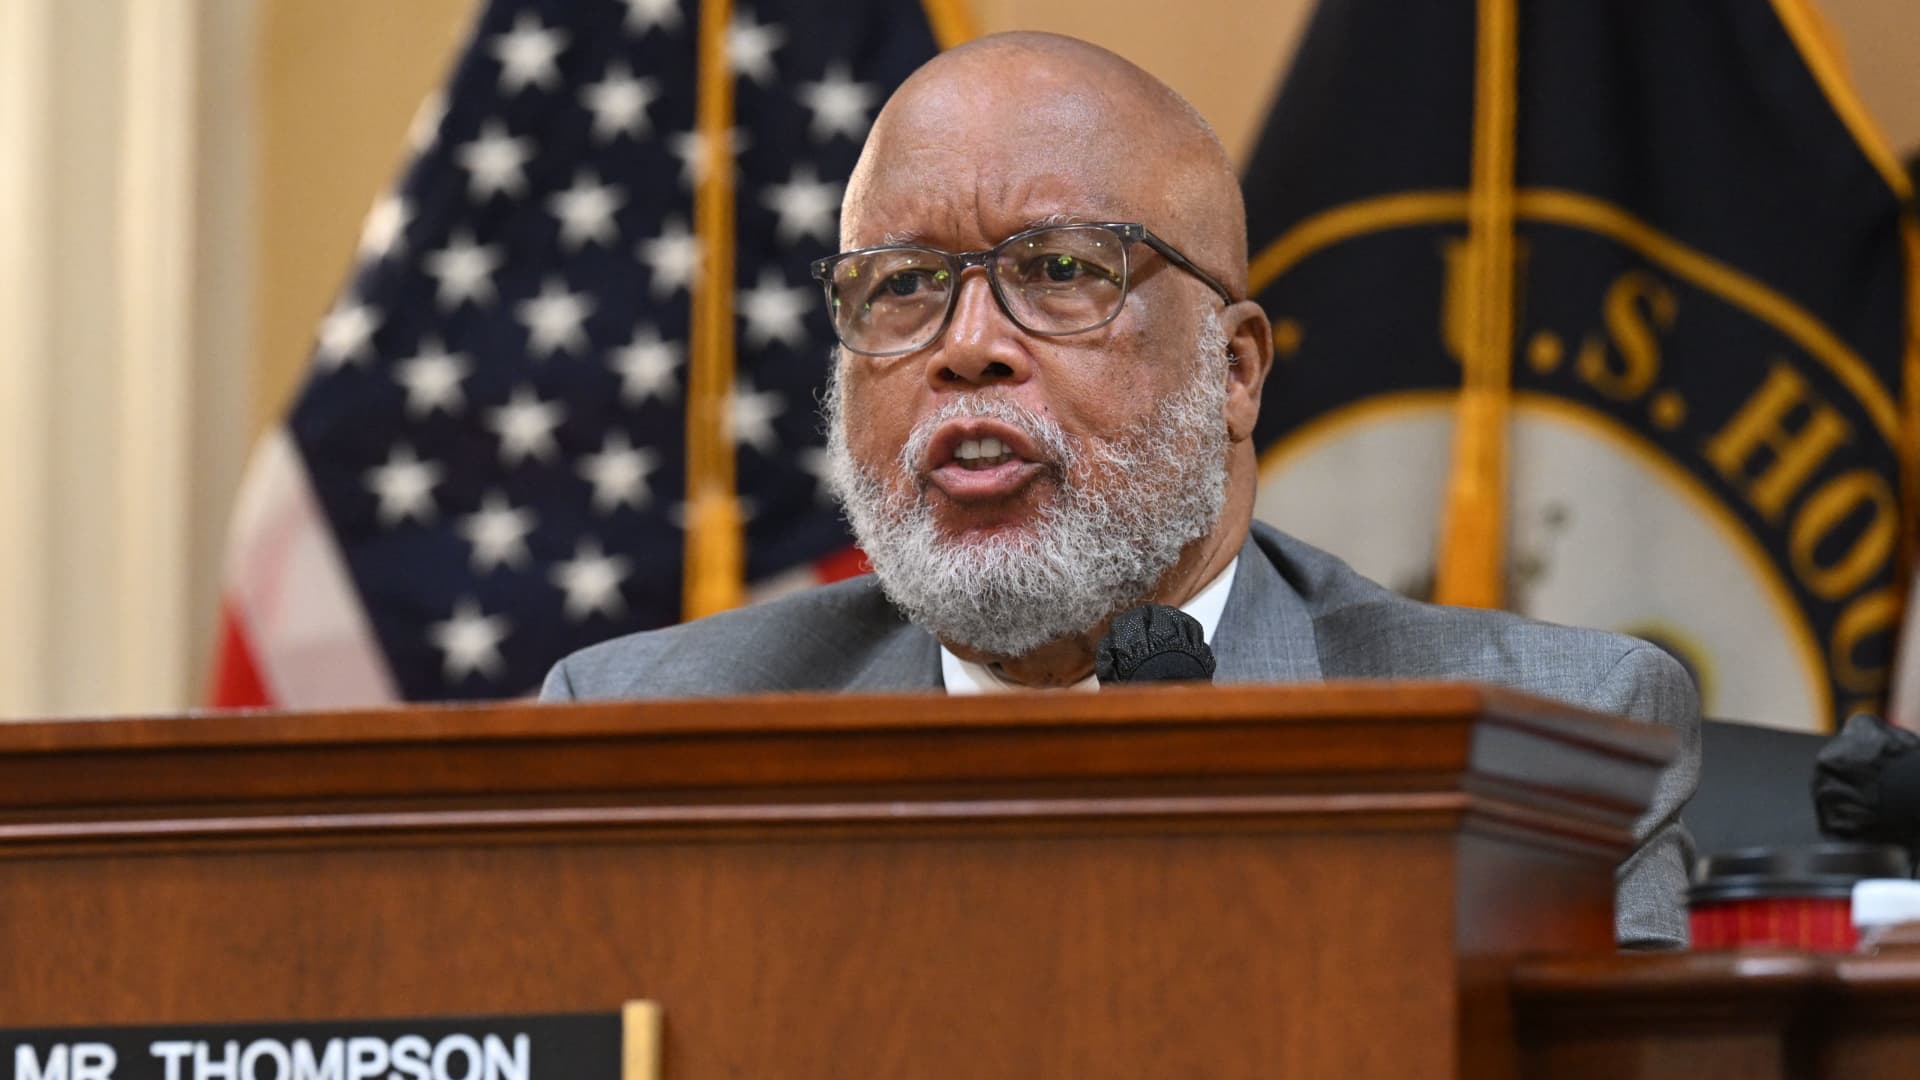 US Representative Bennie Thompson, chairman of the House committee investigating the Capitol riot speaks during a House Select Committee hearing to Investigate the January 6th Attack on the US Capitol, in the Cannon House Office Building on Capitol Hill in Washington, DC, June 13, 2022.